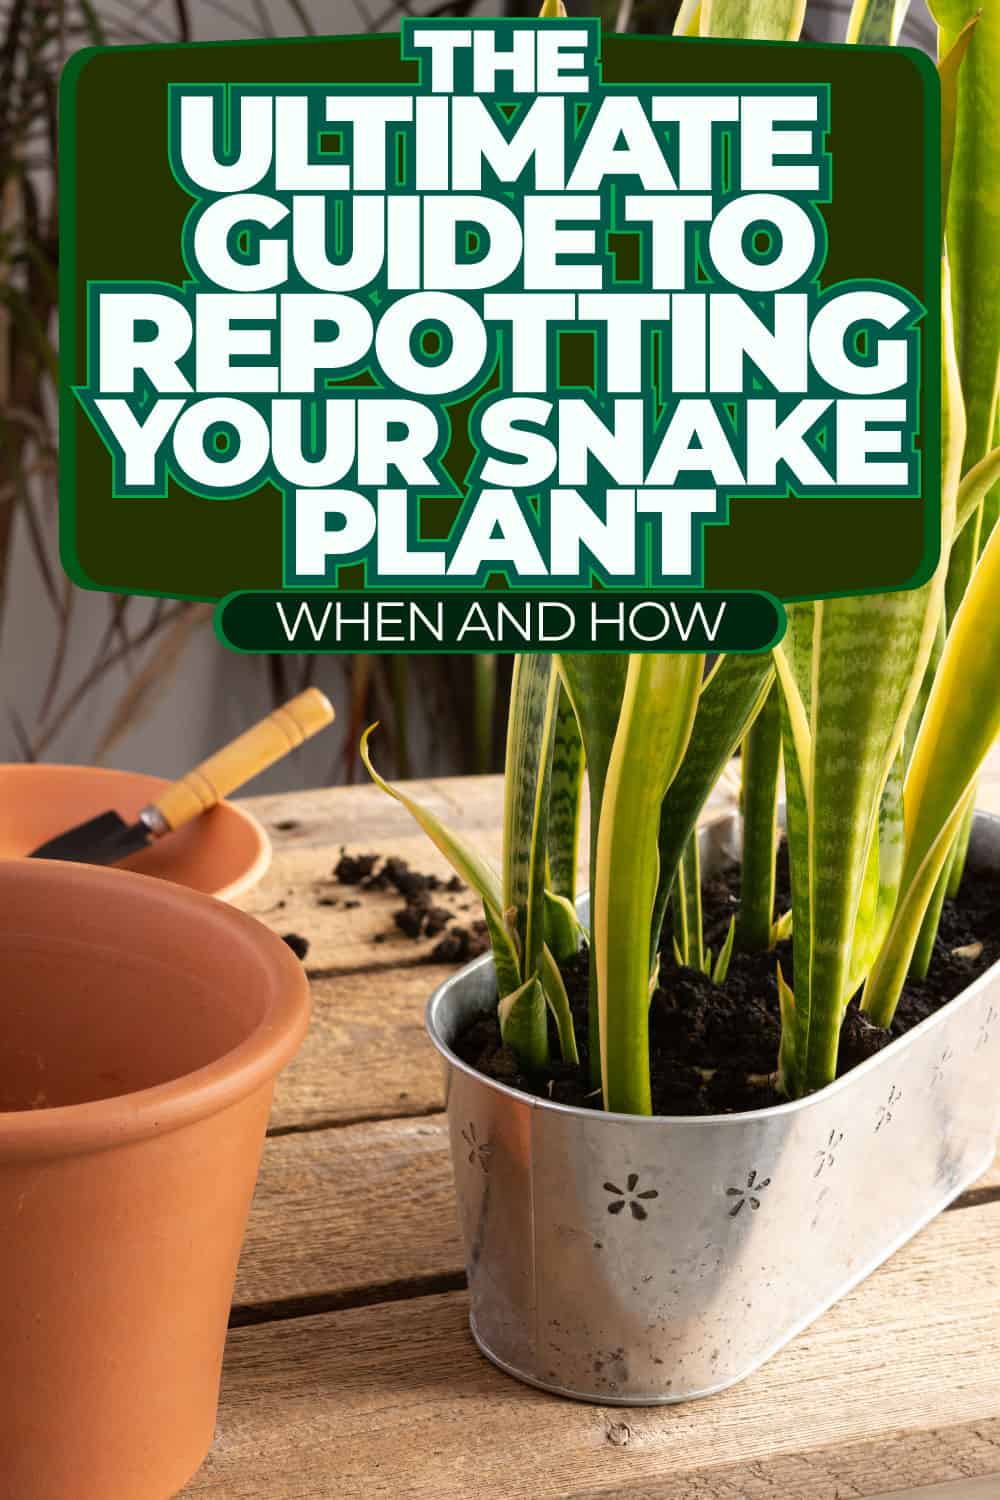 The Ultimate Guide To Repotting Your Snake Plant: When And How